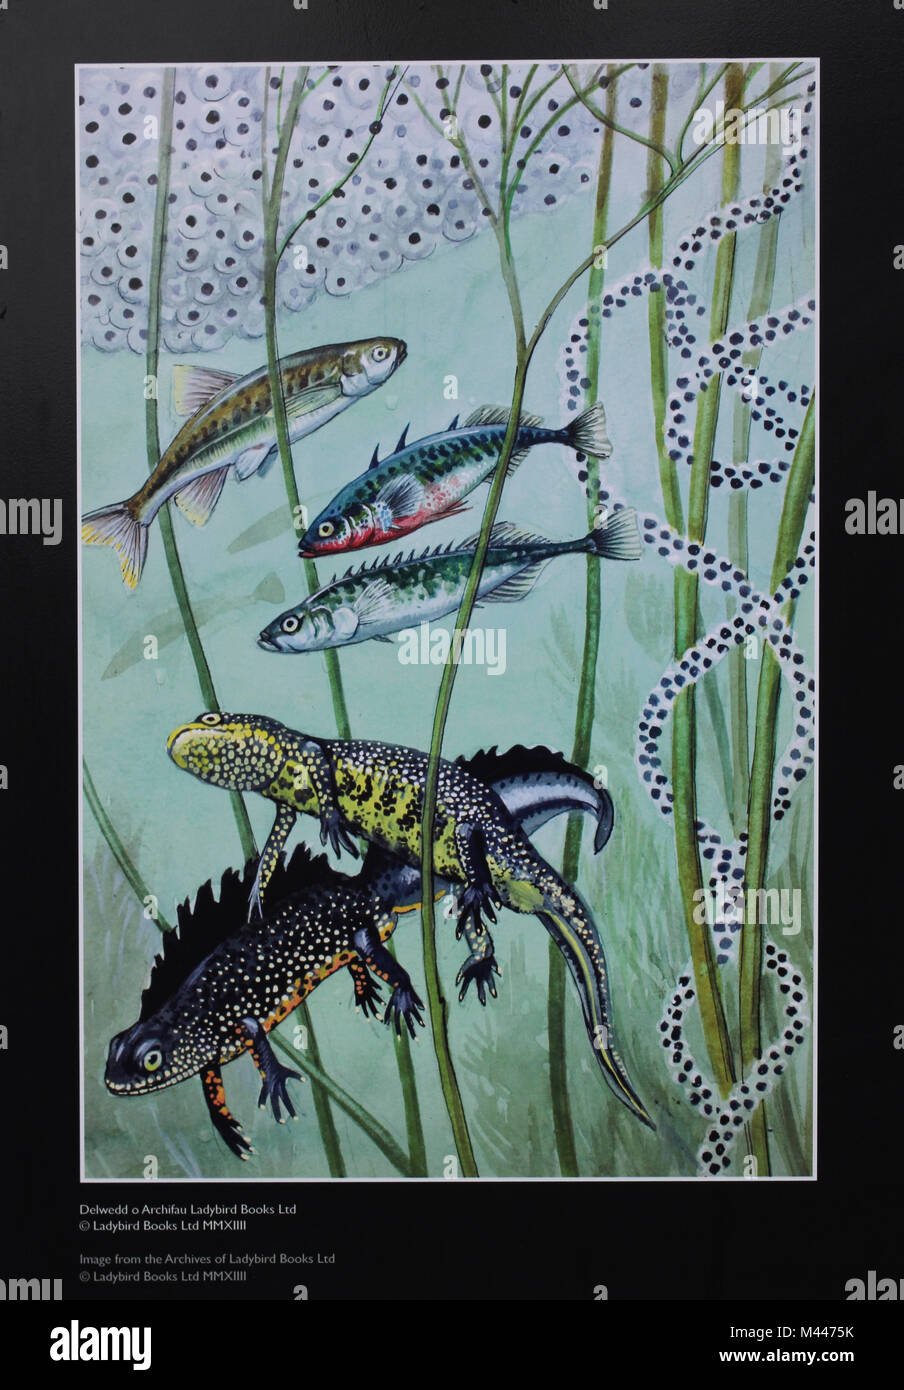 Illustration Plaque Of Great Crested Newts, Frogspawn, Newtspawn, Minnow & Sticklebacks by Charles Tunnicliffe From Ladybird Book of Pond Life Stock Photo